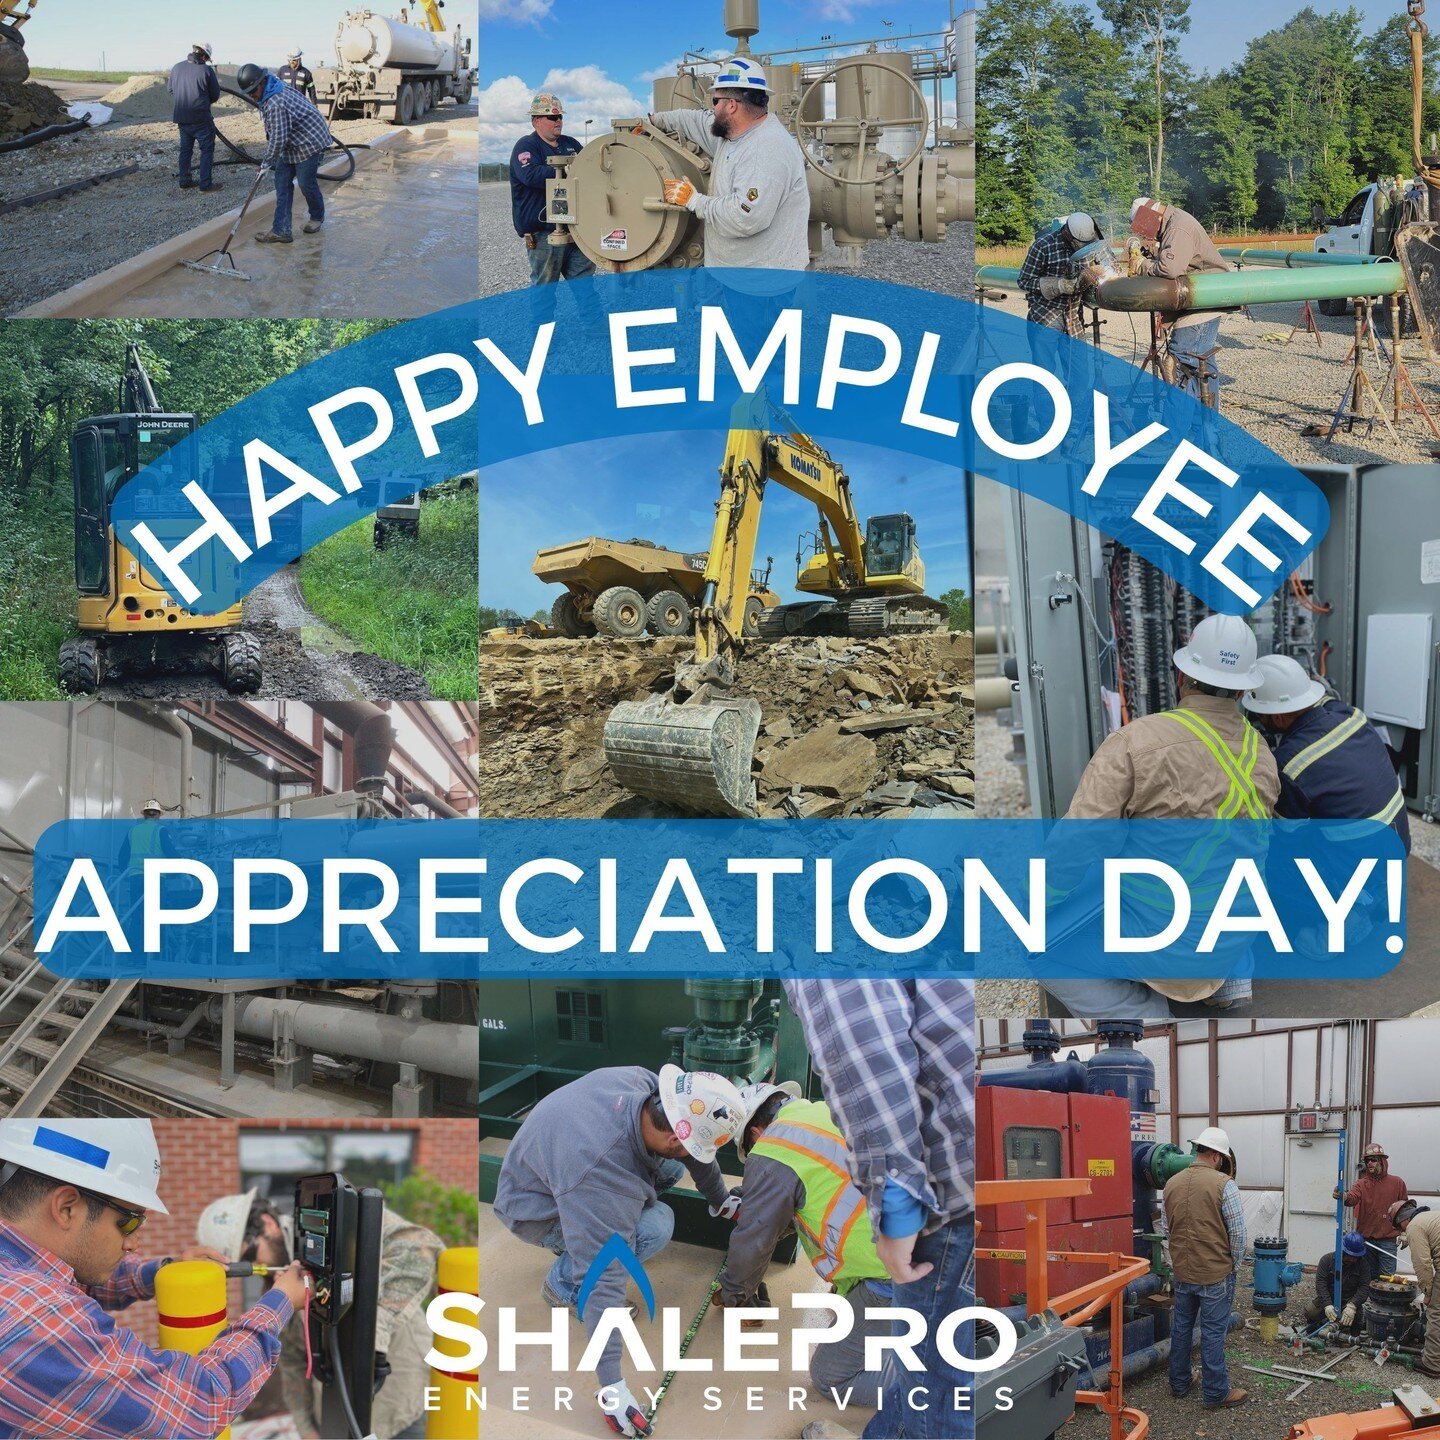 We are thankful for our employees every day, but especially today on Employee Appreciation Day! Our employees make ShalePro what it is and we are grateful for the hard work they put in day-in and day-out for our clients. THANK YOU! 
#GoWithThePro #Em